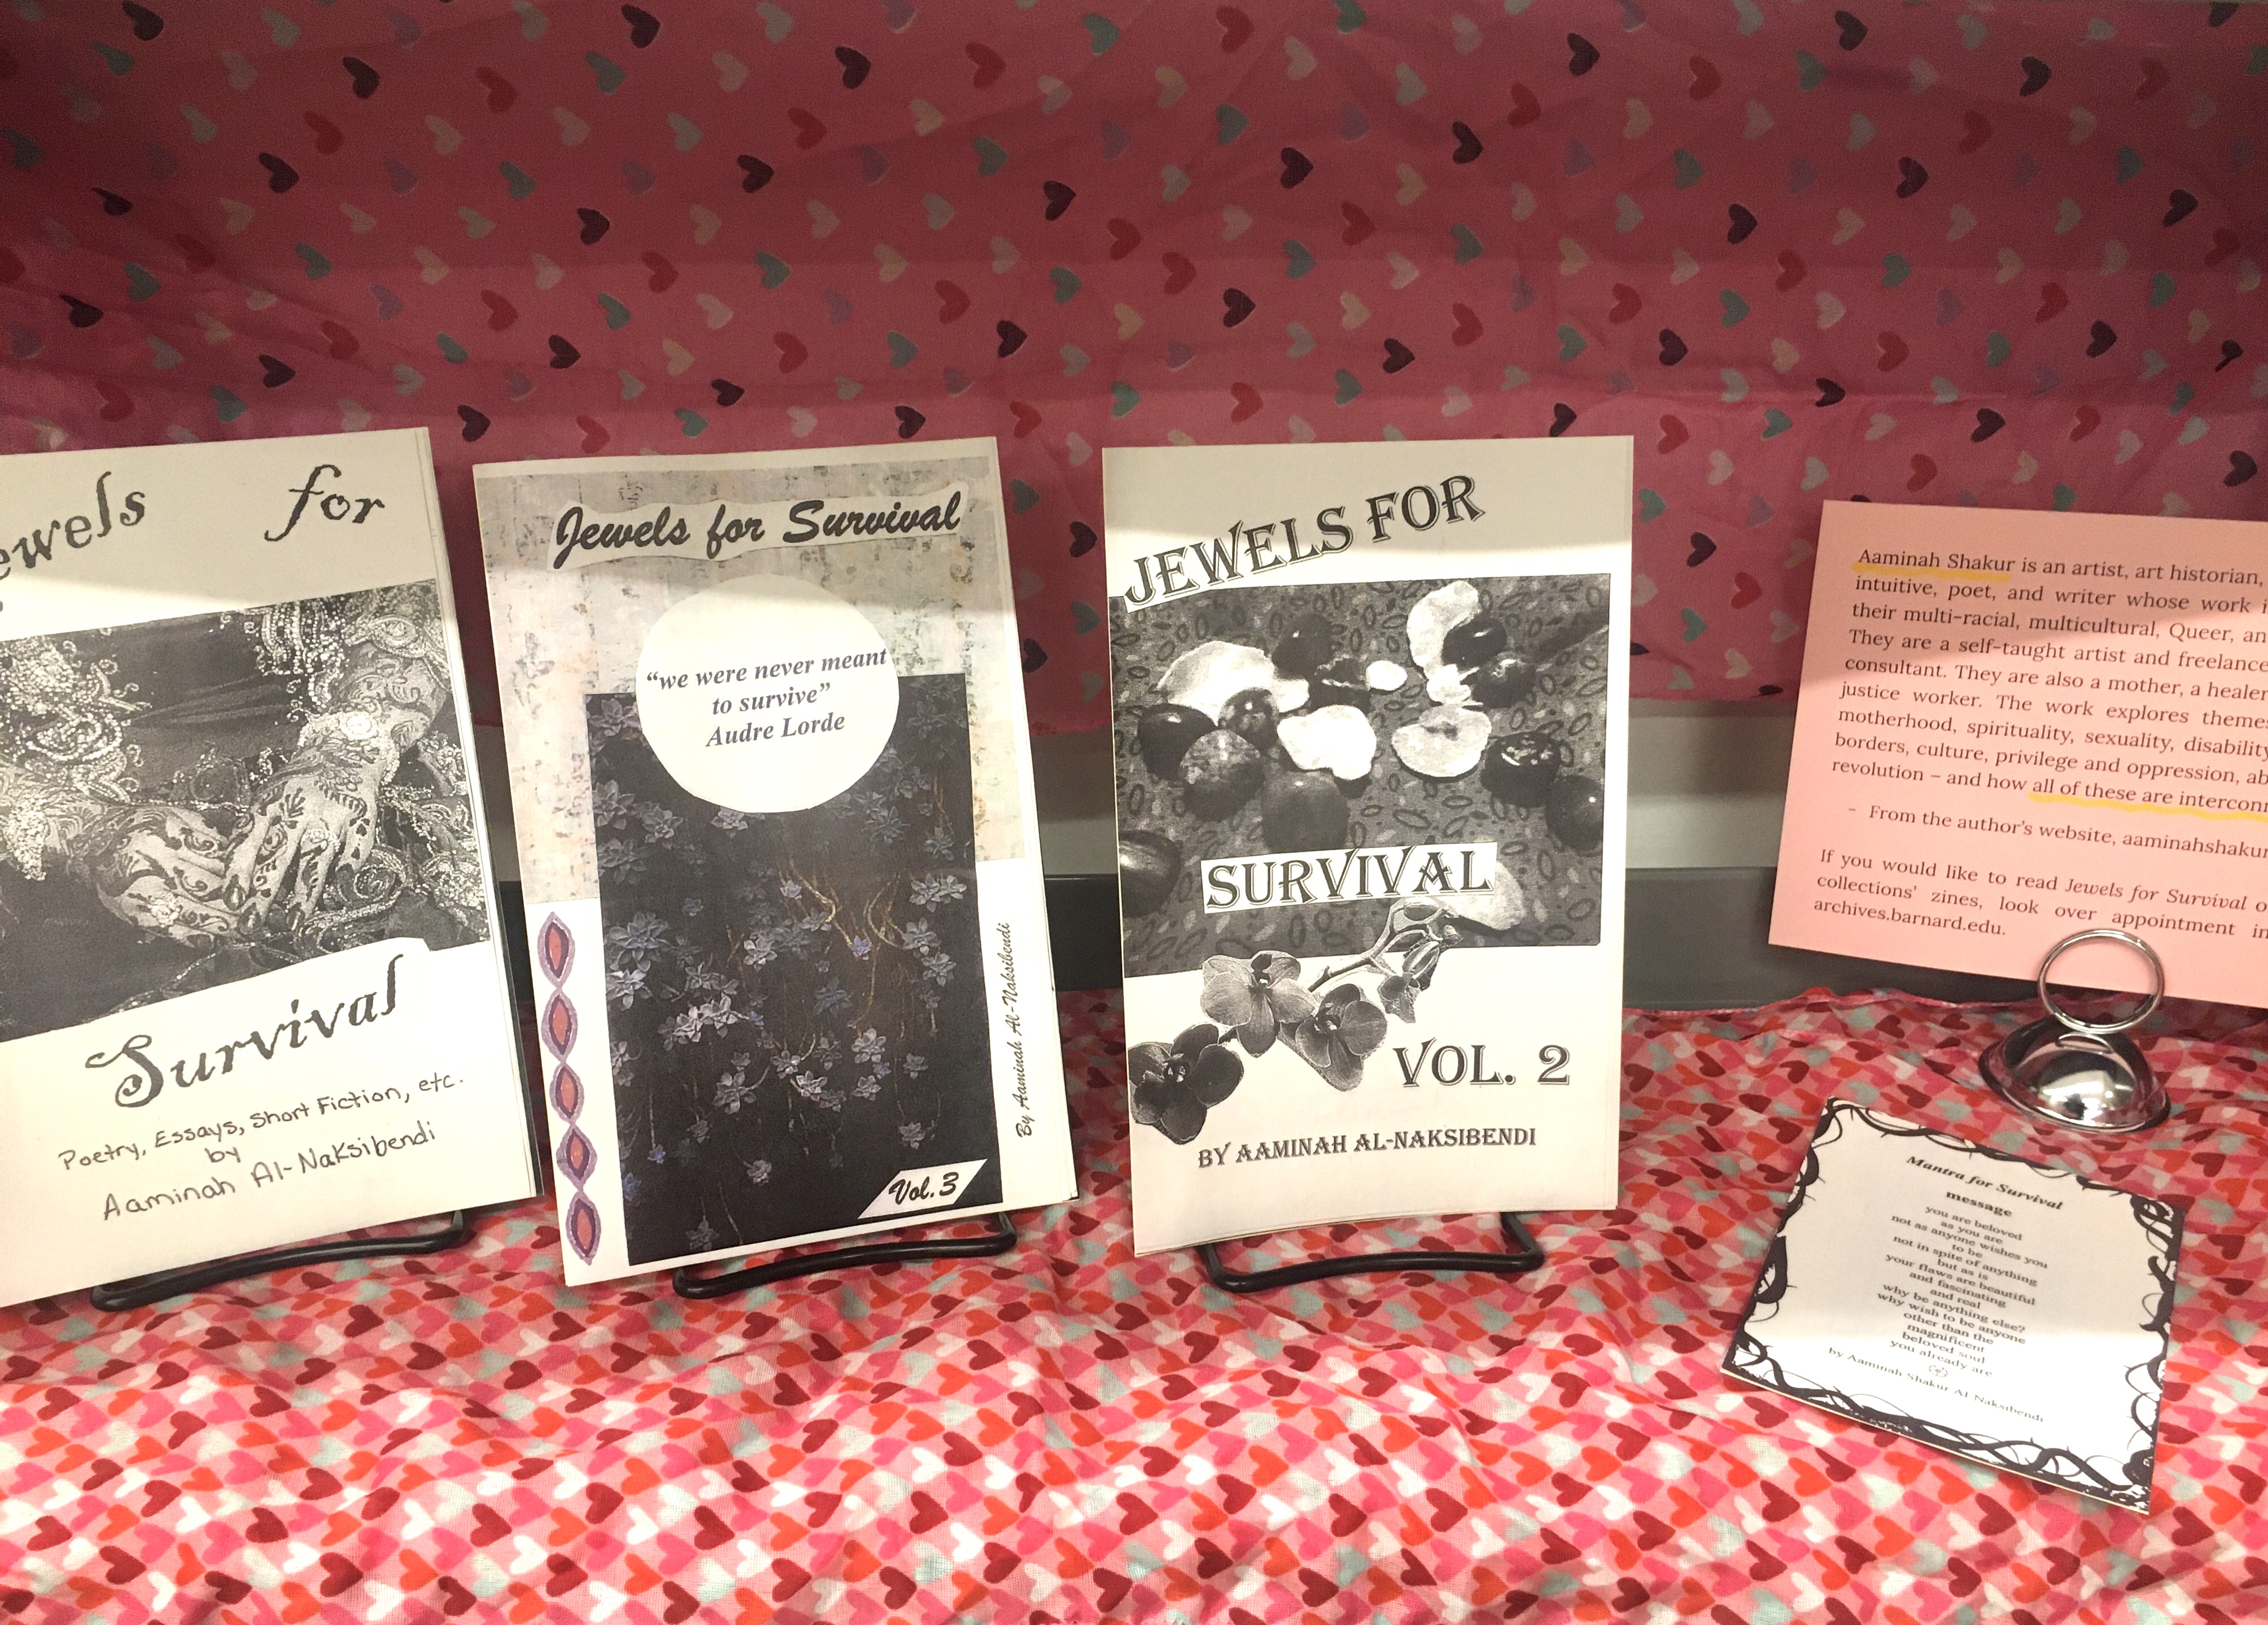 A zine display featuring three photocopied zines, a little pamphlet with a poem written on it by the author, a label for the display, and pink fabric behind the display with colorful hearts